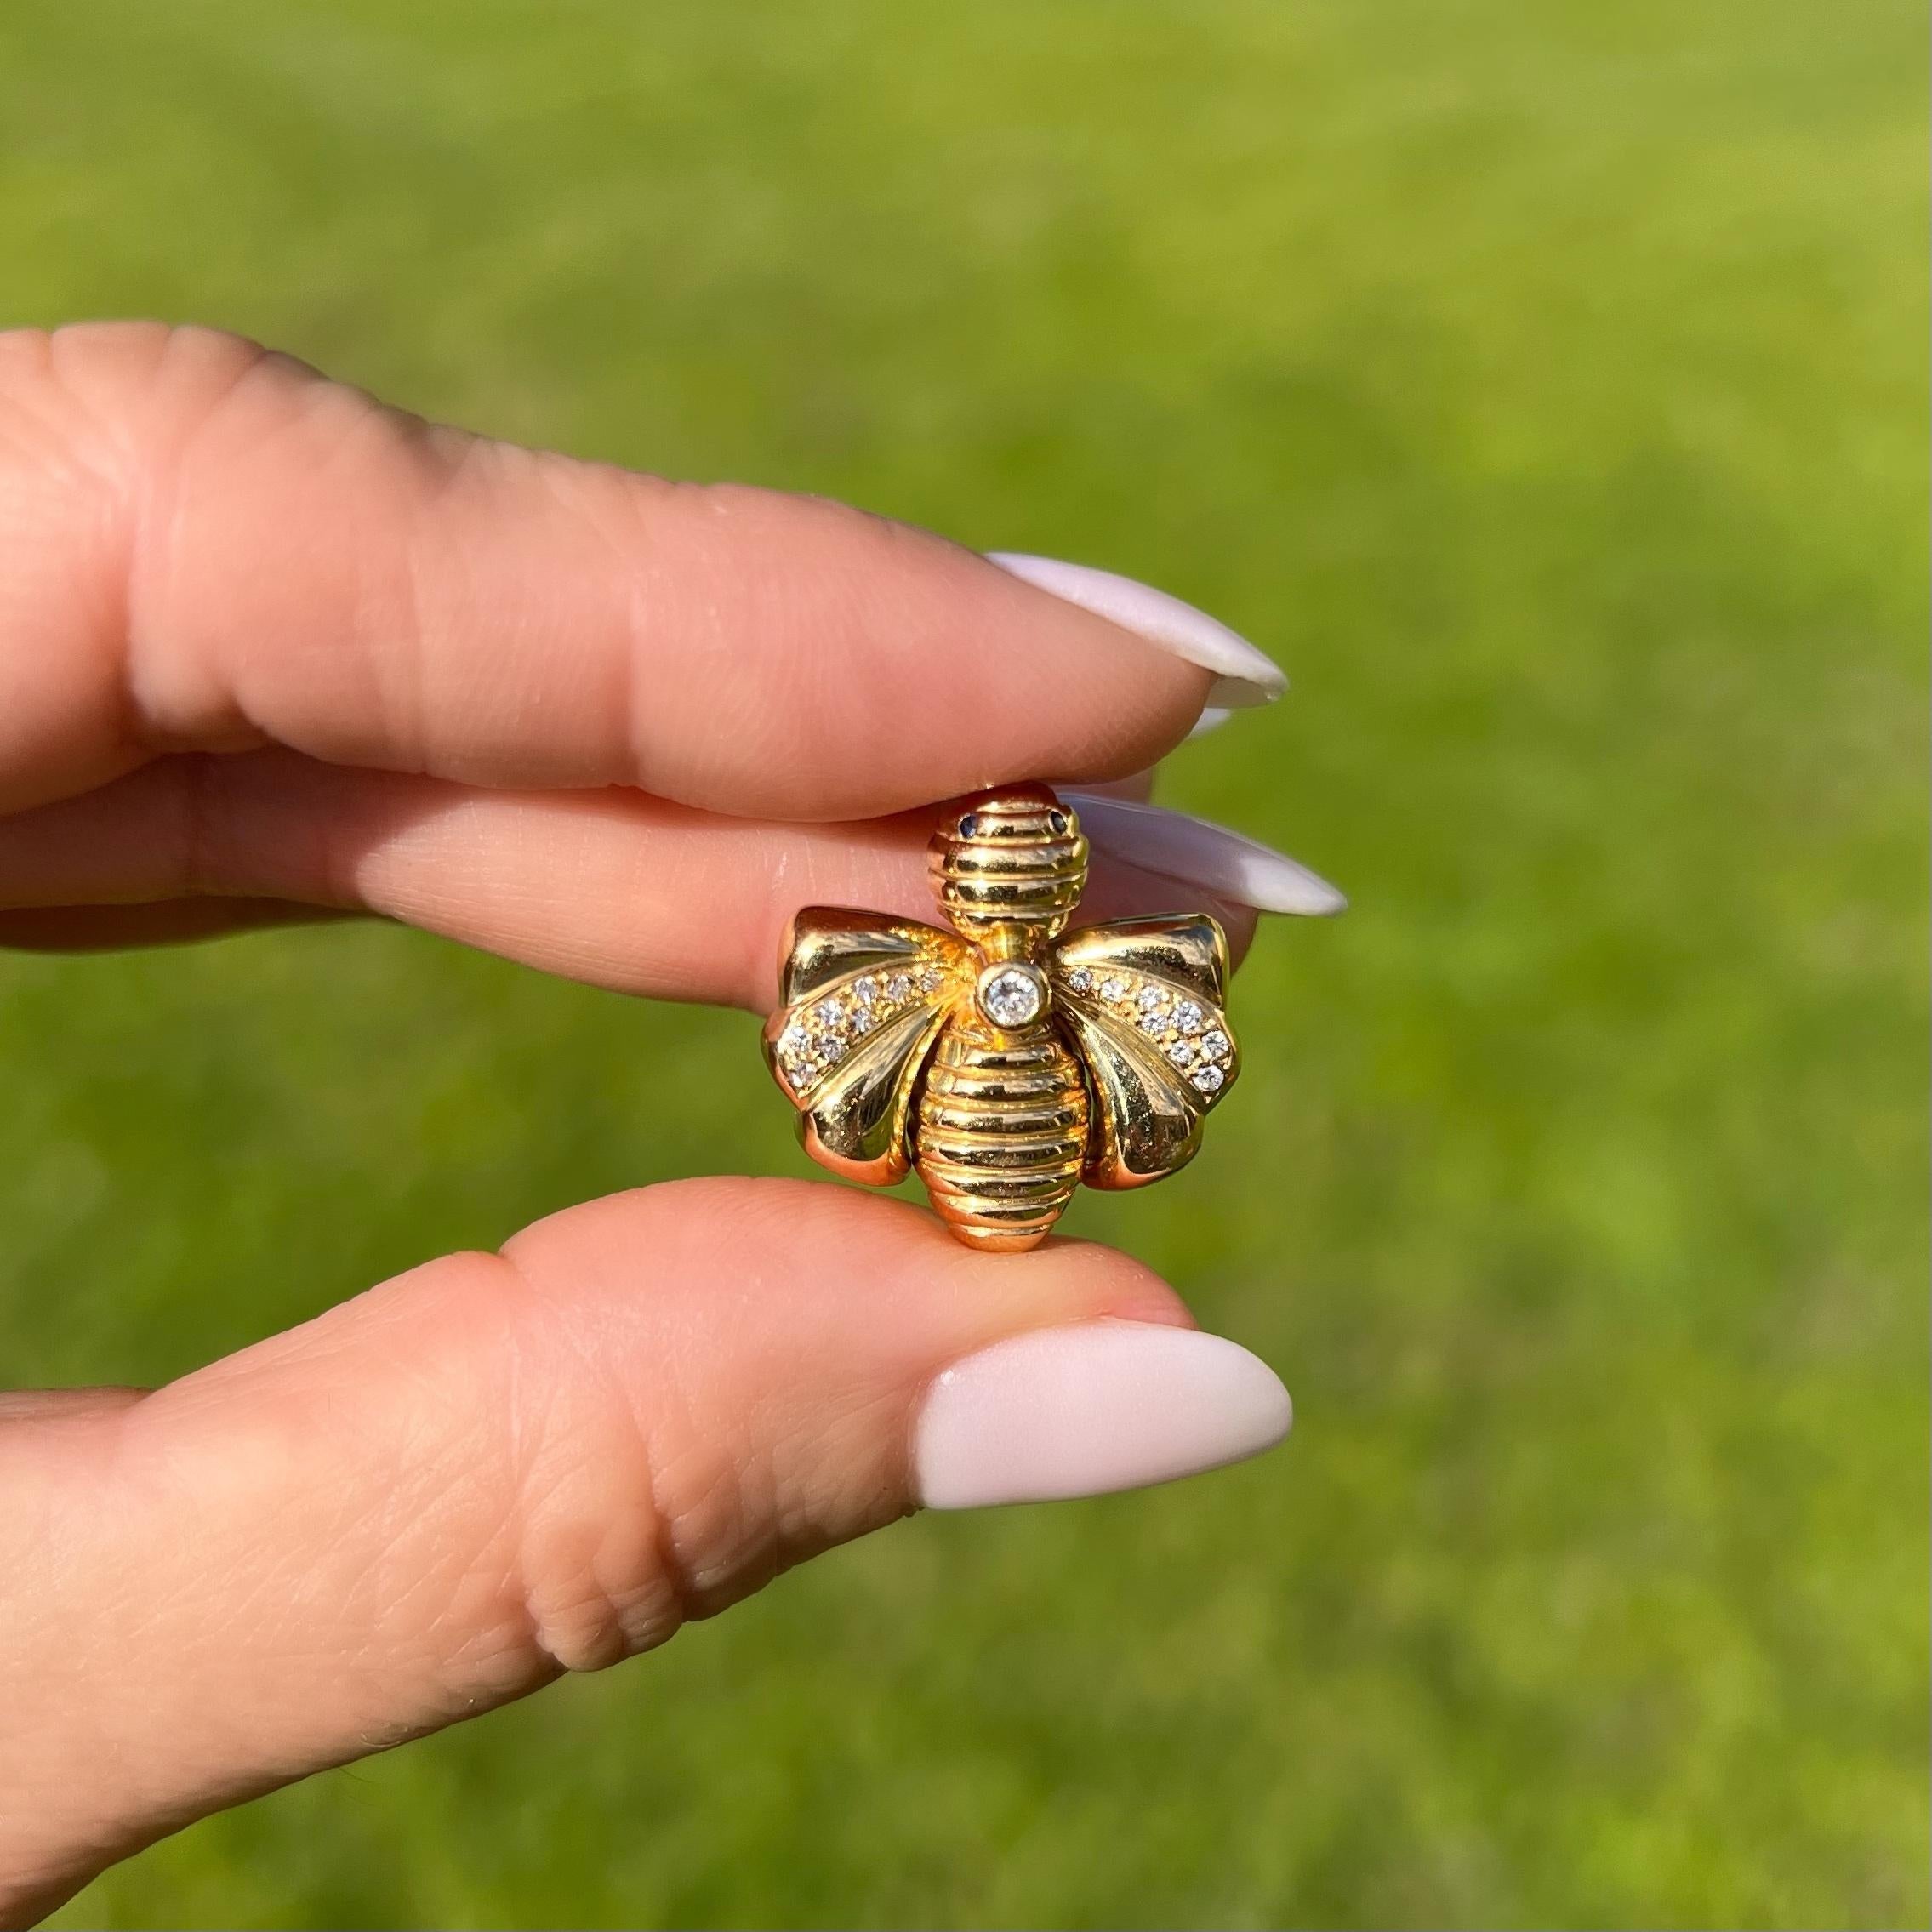 Signed Chaumet Delightful Bumble Bee Insect Pendant with Hand bezel set Diamond, approx. 0.15 Carat. Signed: CHAUMET PARIS. Hand crafted in 18K Yellow Gold. Chic and Timeless…Sure to be admired complement to every outfit!

